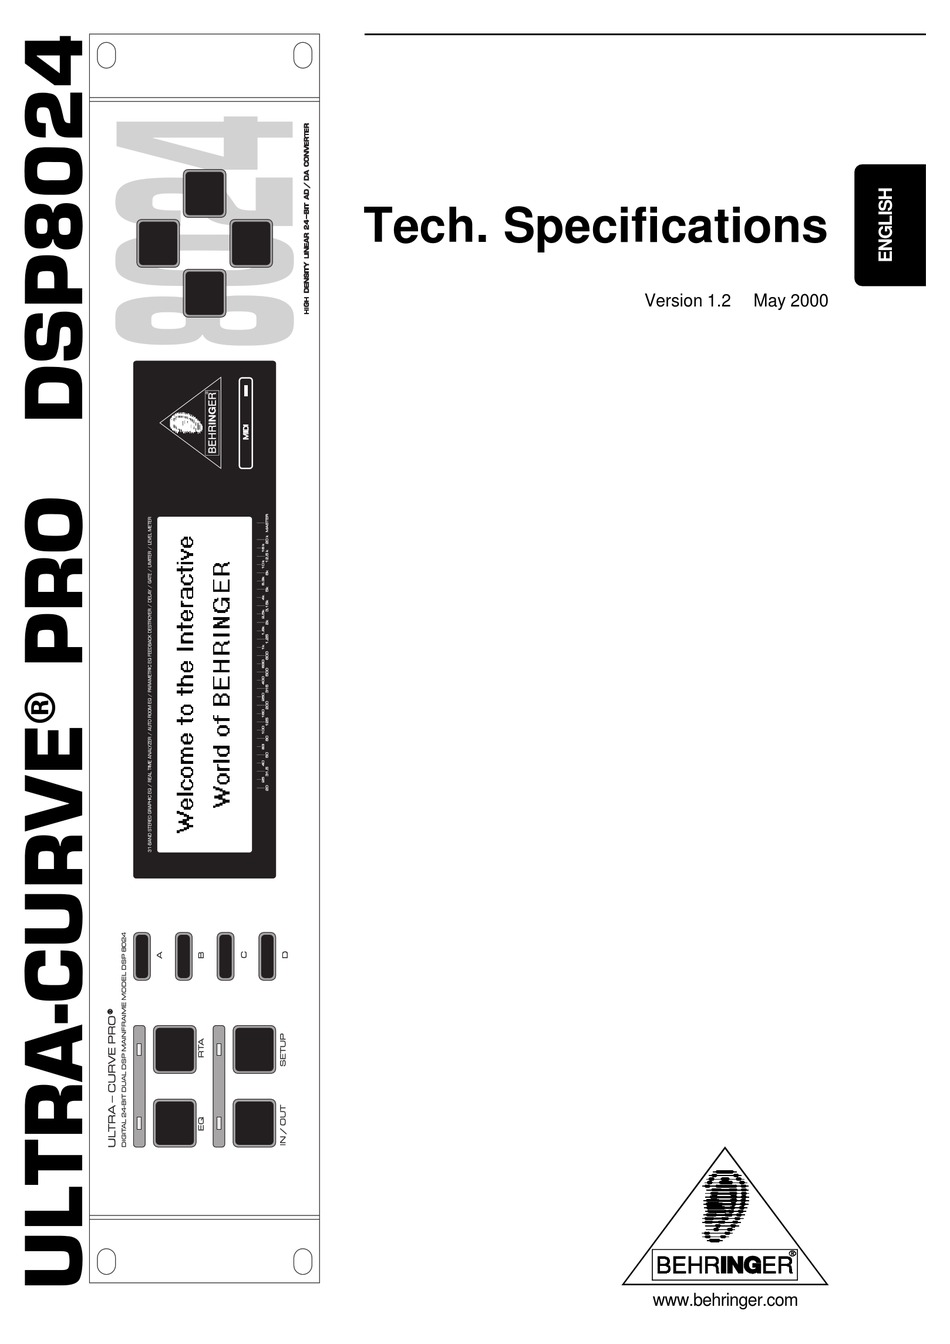 BEHRINGER ULTRA-CURVE PRO DSP8024 TECHNICAL SPECIFICATIONS Pdf 